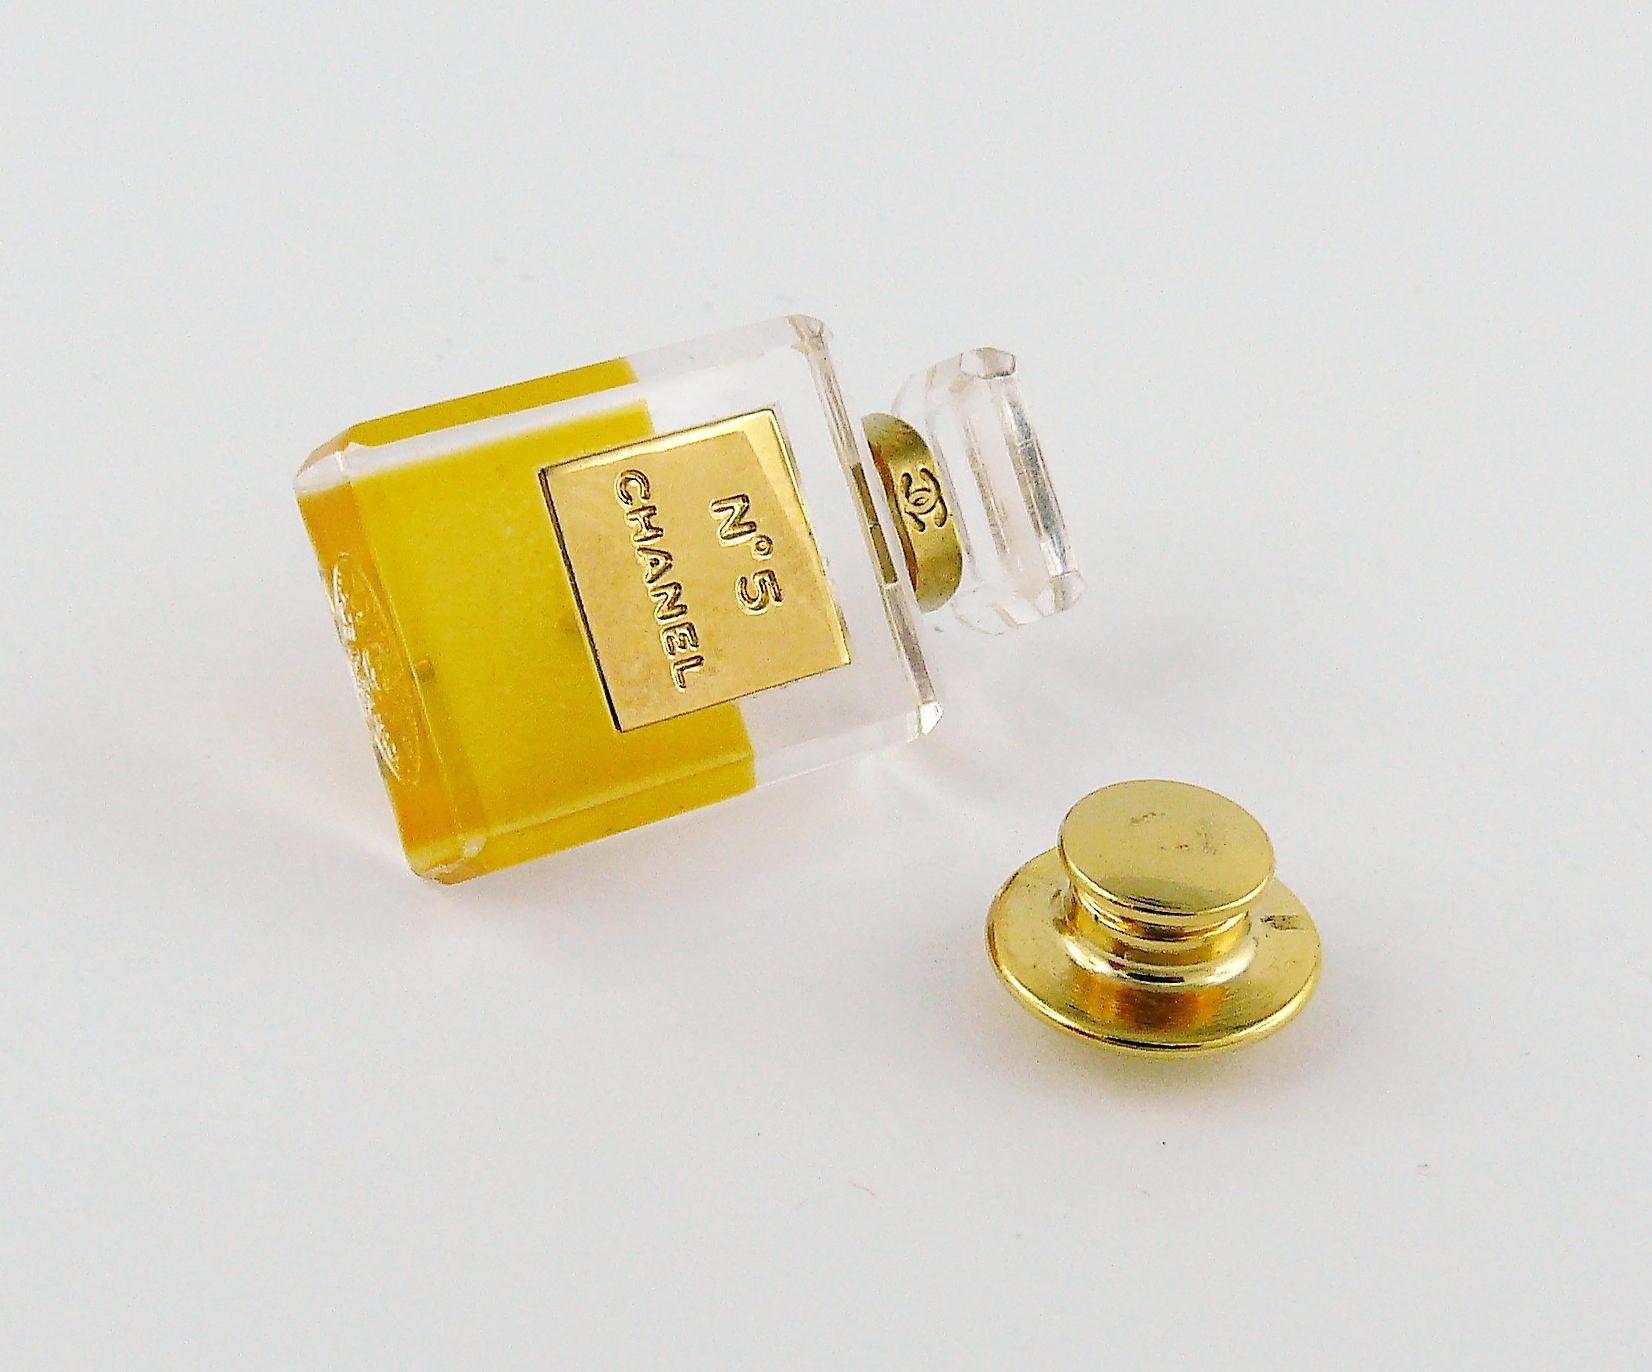 Chanel Iconic No. 5 Perfume Bottle Pin Brooch 1